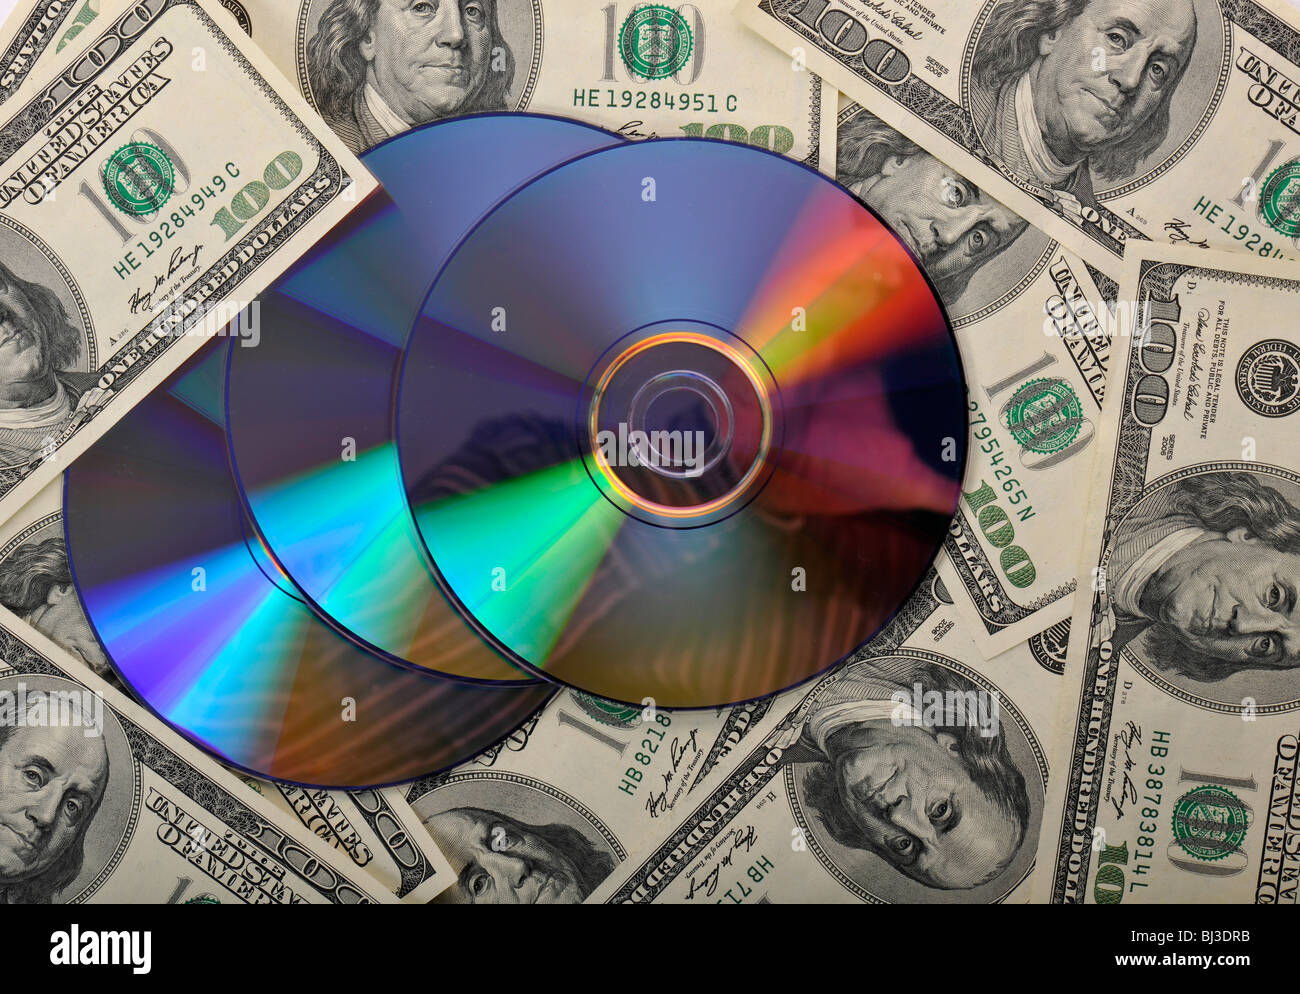 DVDs, CDs, 100-dollar bills, symbolic image for the purchase of bank records, tax evasion, privacy Stock Photo